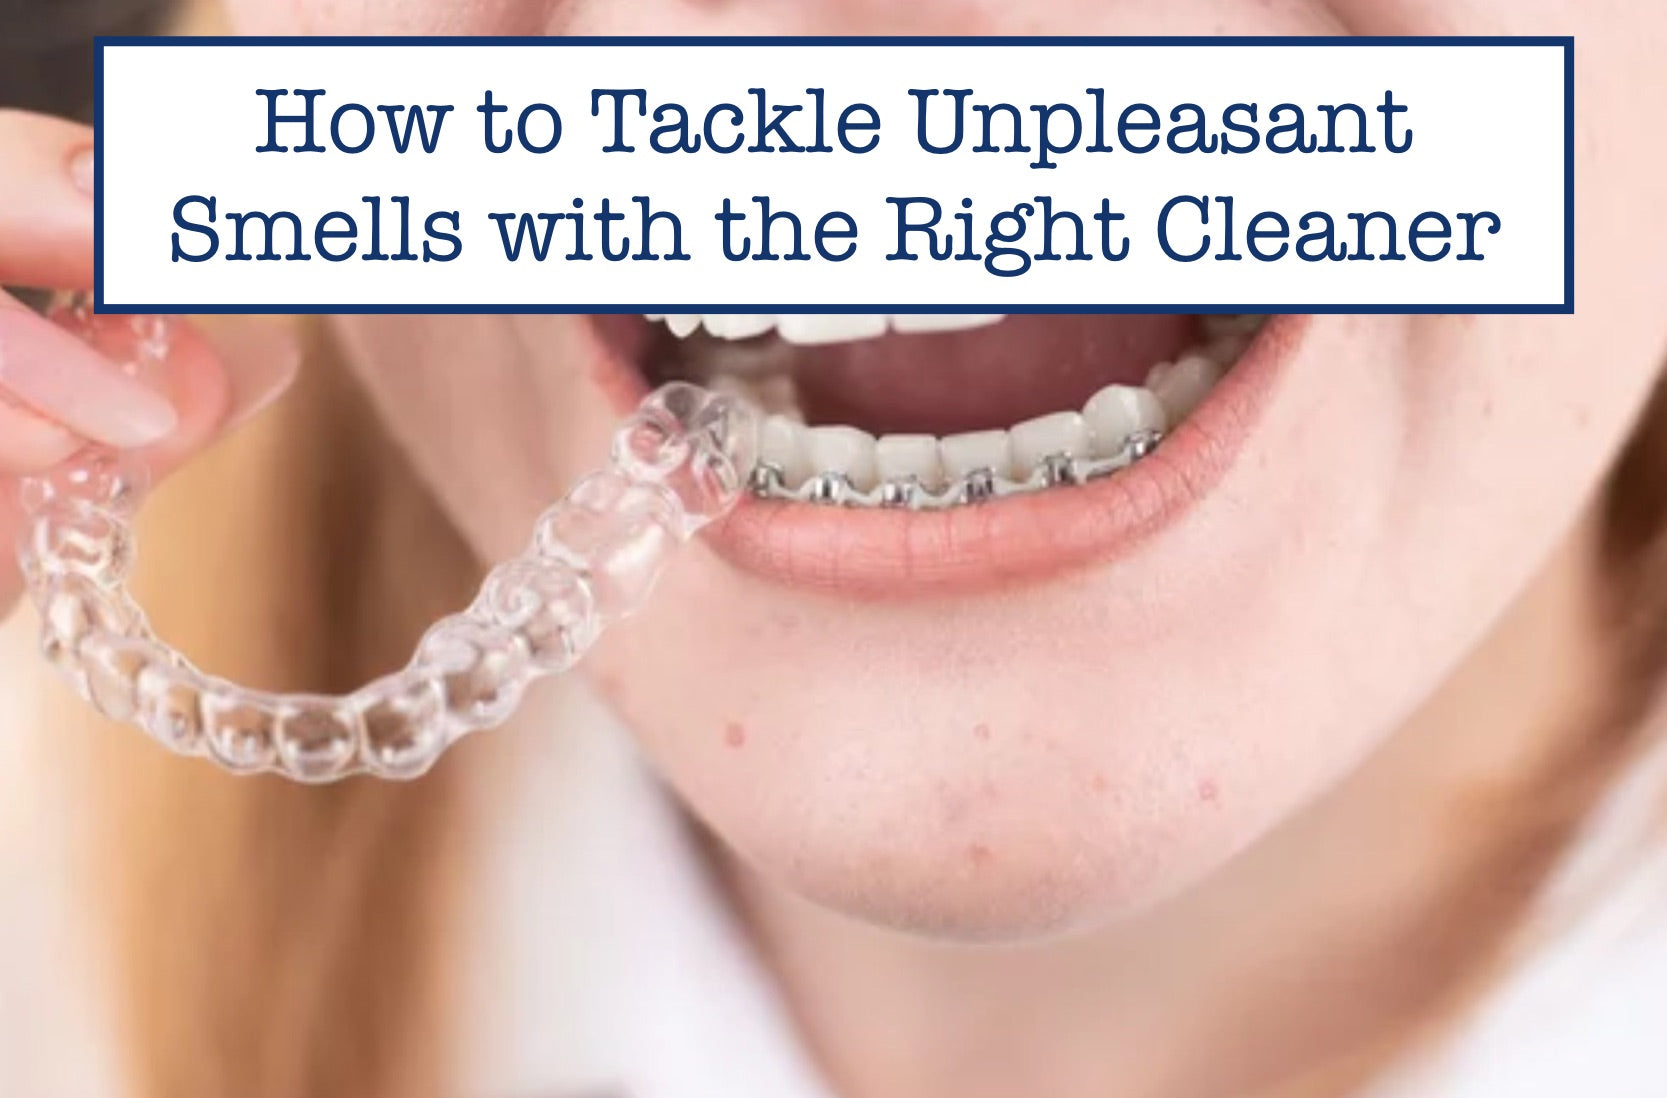 How to Tackle Unpleasant Smells with the Right Cleaner